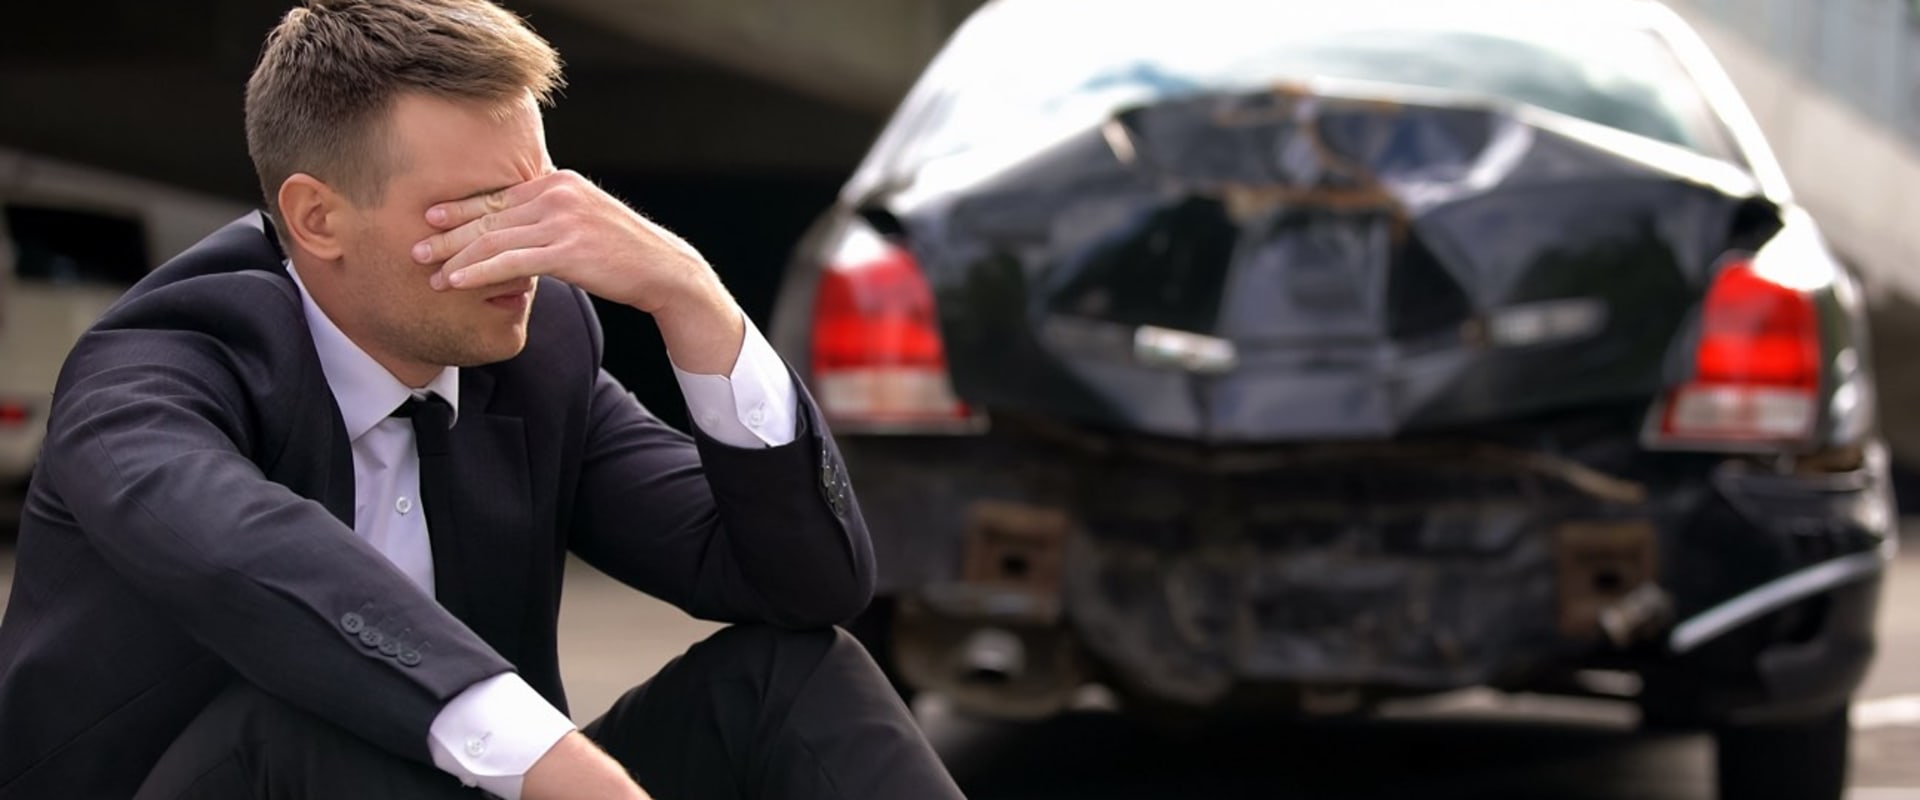 The Importance of Choosing a Qualified Attorney for an Auto Accident Case Outside of New Jersey